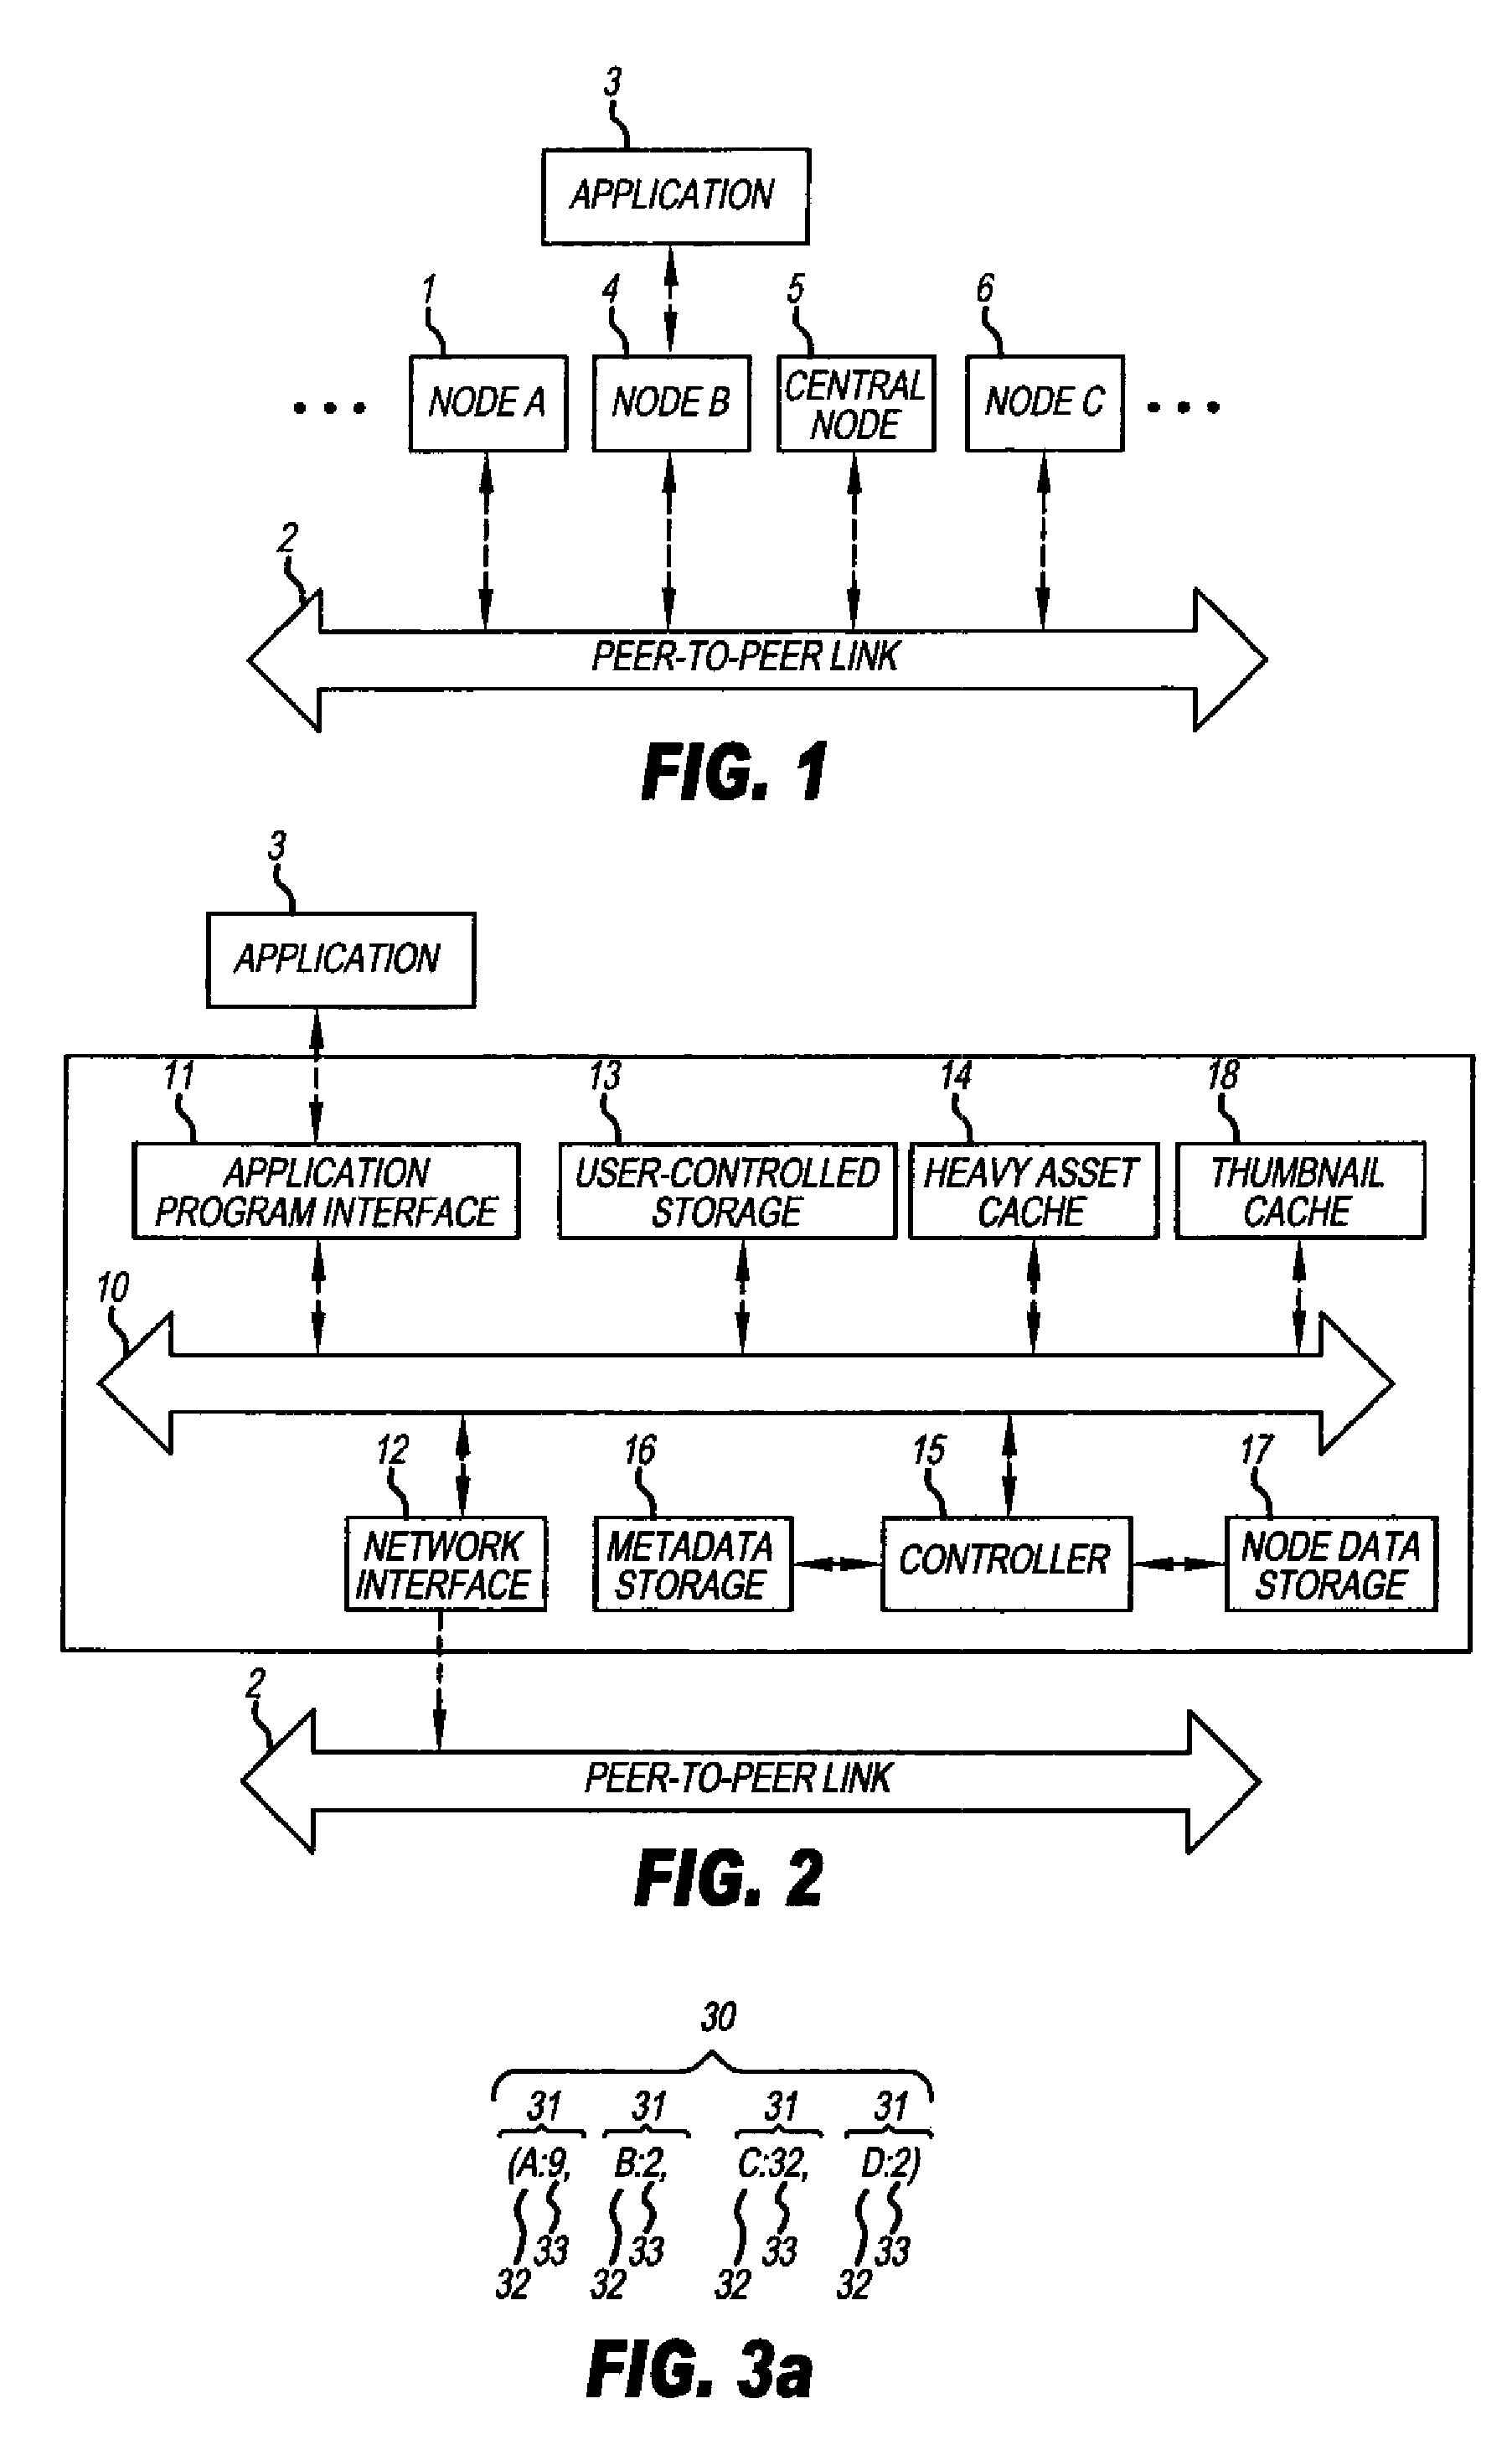 System for managing distributed assets and medadata